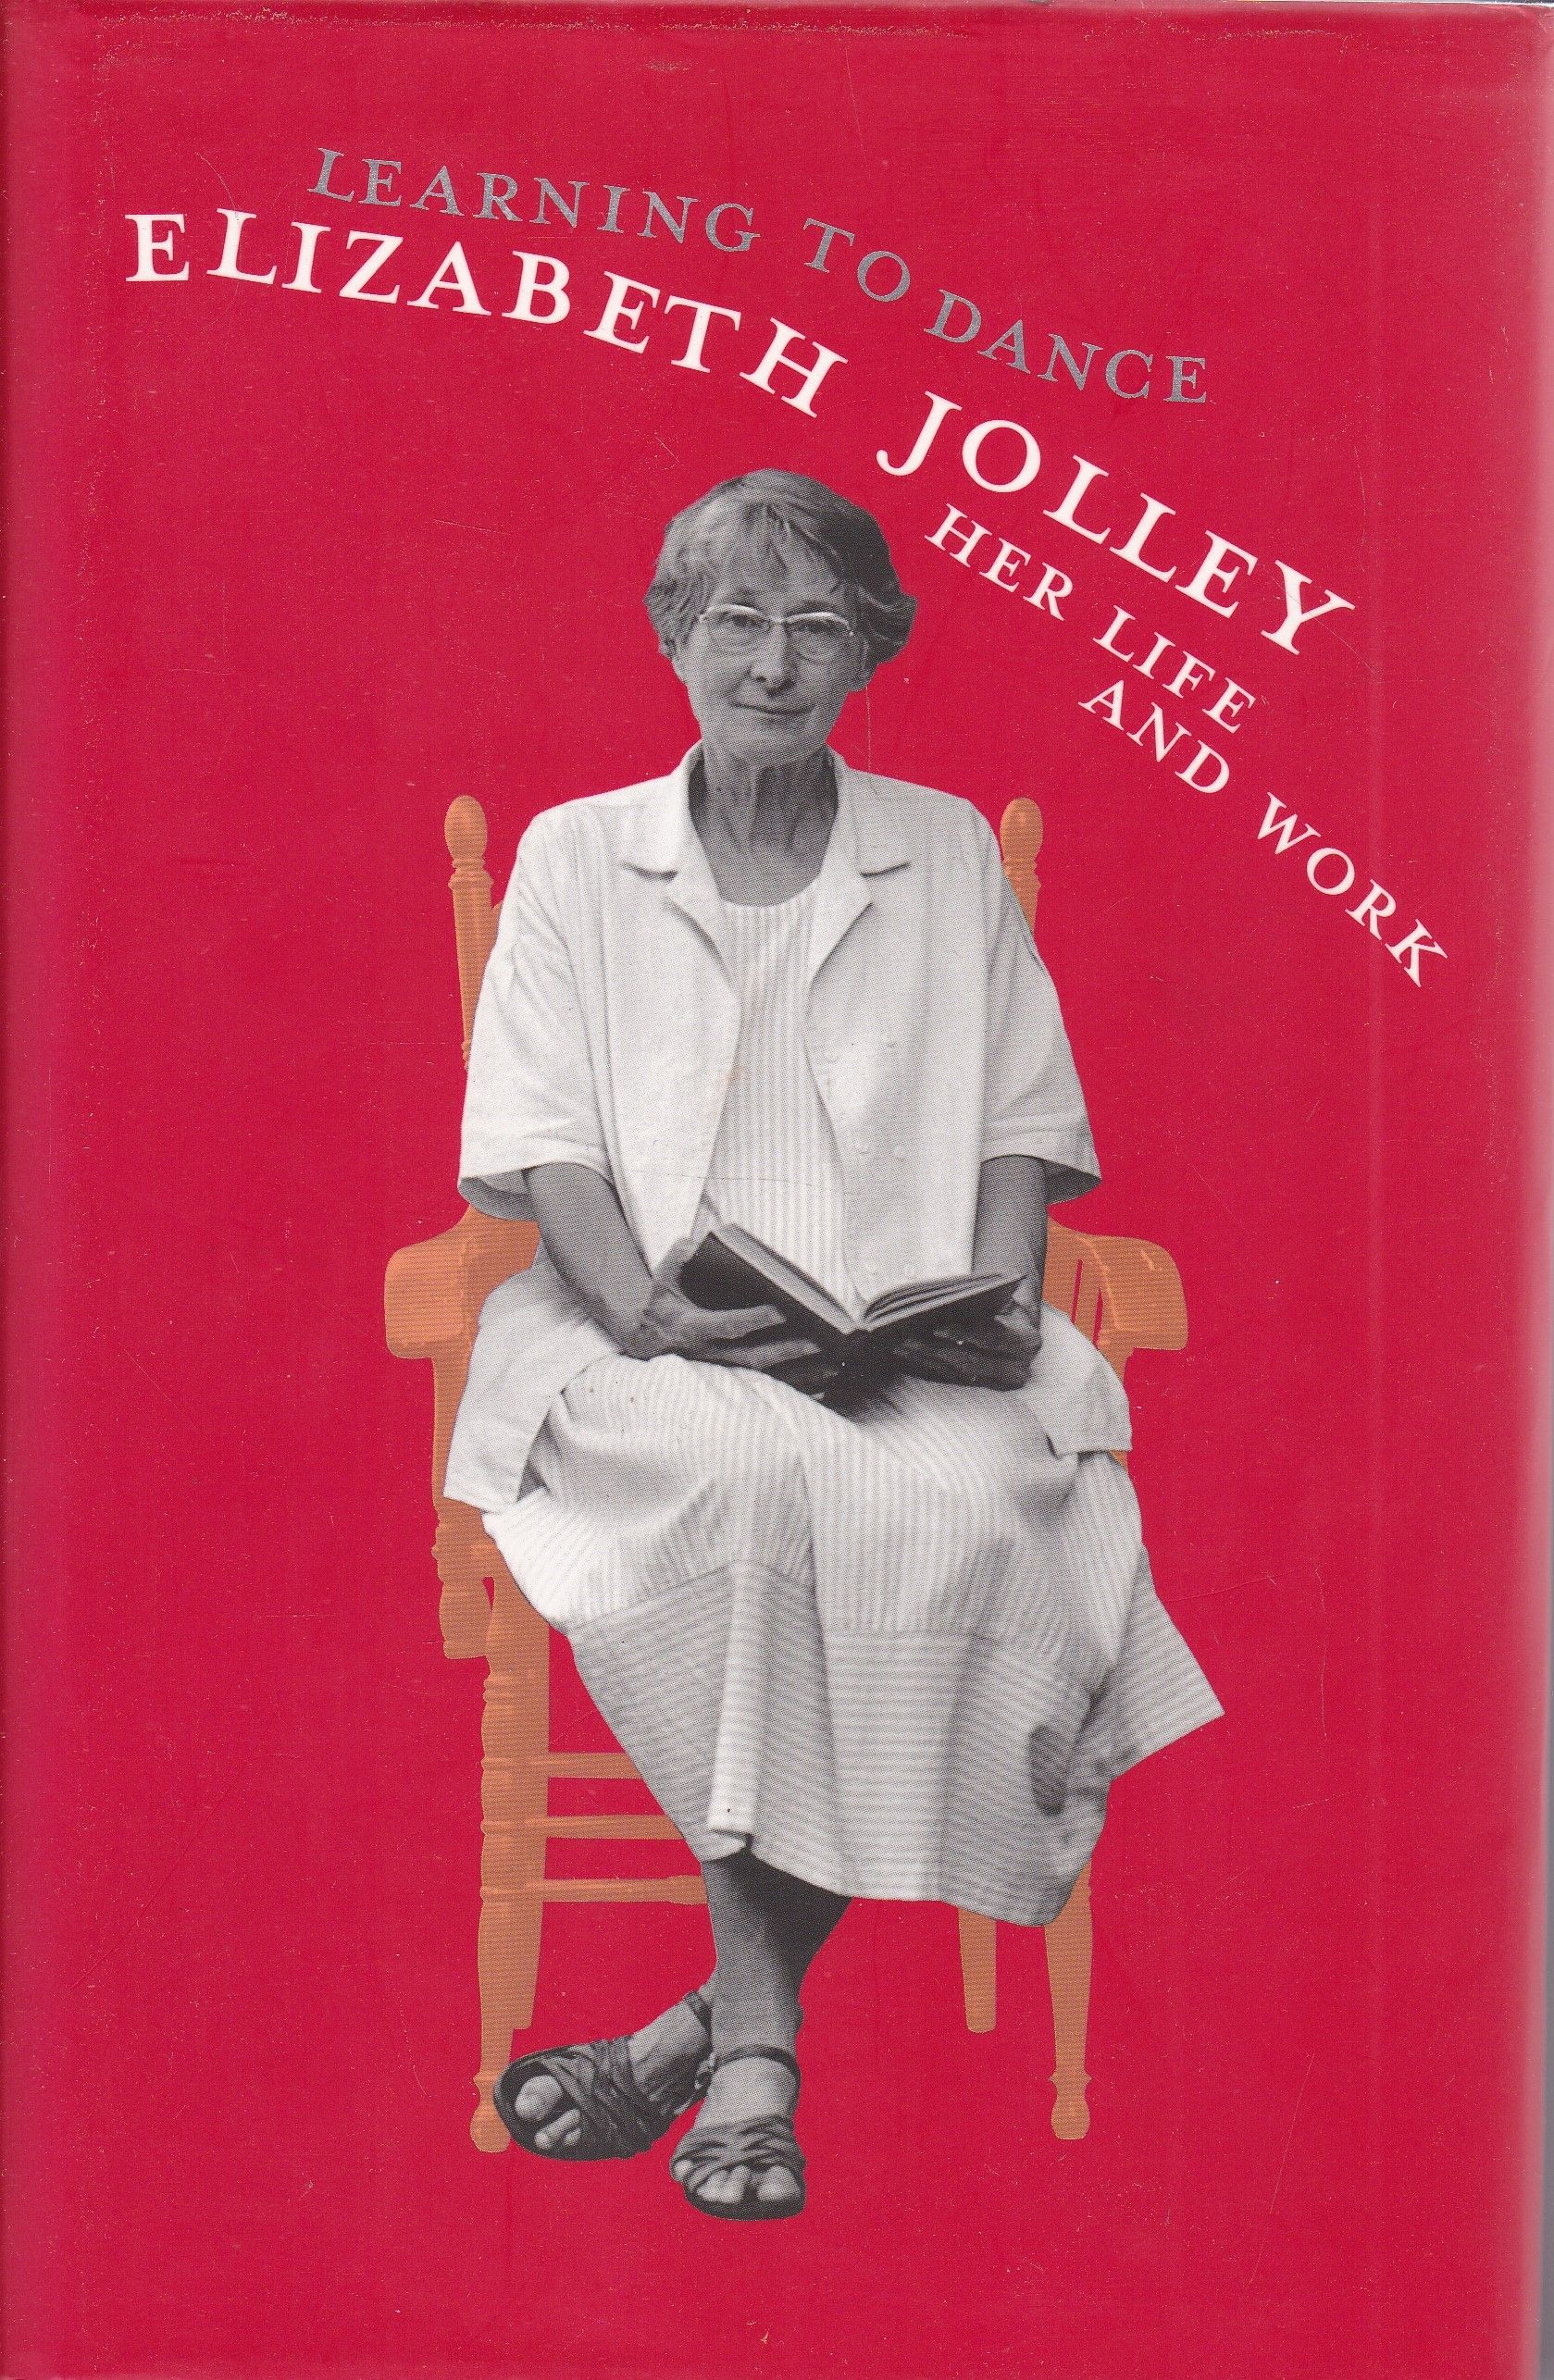 Learning To Dance: Elizabeth Jolley – Her life and work